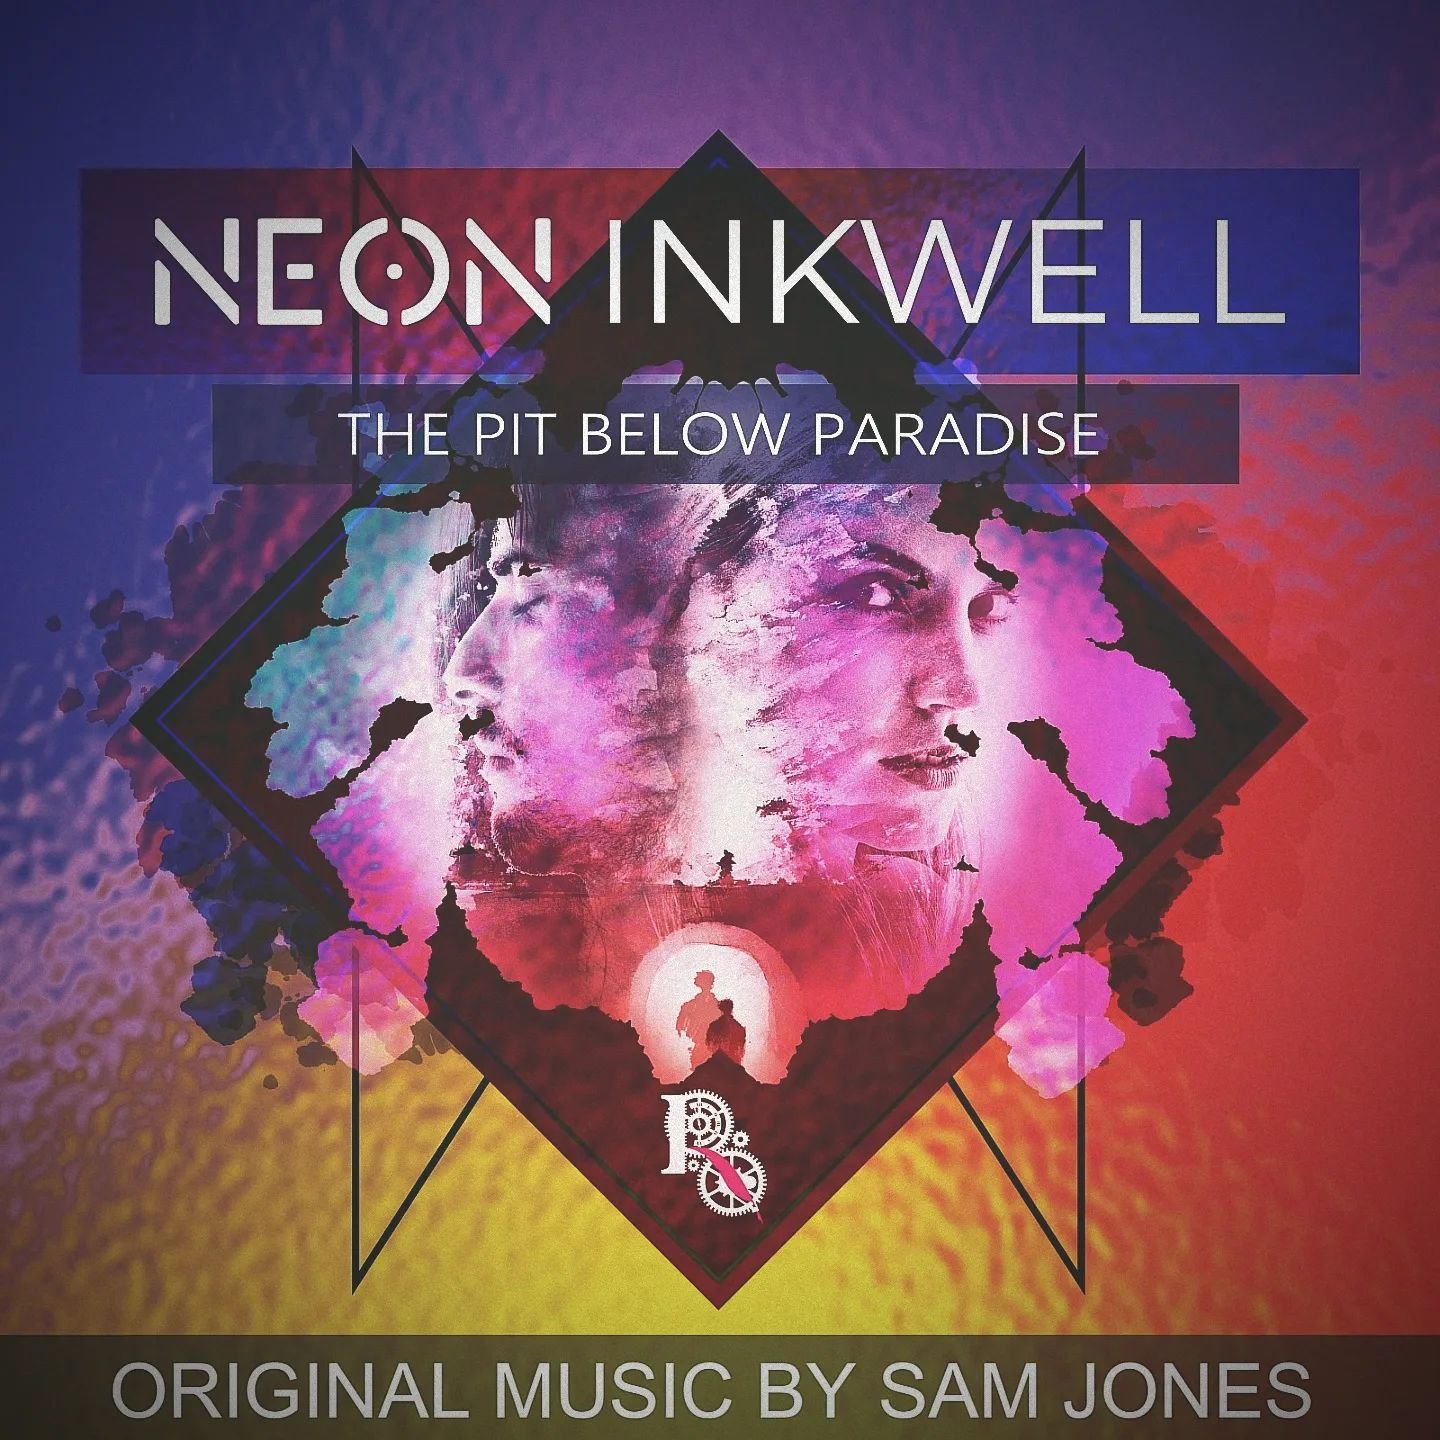 An absolute pleasure to write the music for this podcast series #thepitbelowparadise . Click the link in the bio to listen!
Huge thanks to my fabulous instrumentalists @gordonturner and @calyssadavidson

#thepitbelowparadise  #neoninkwell #podcast #m